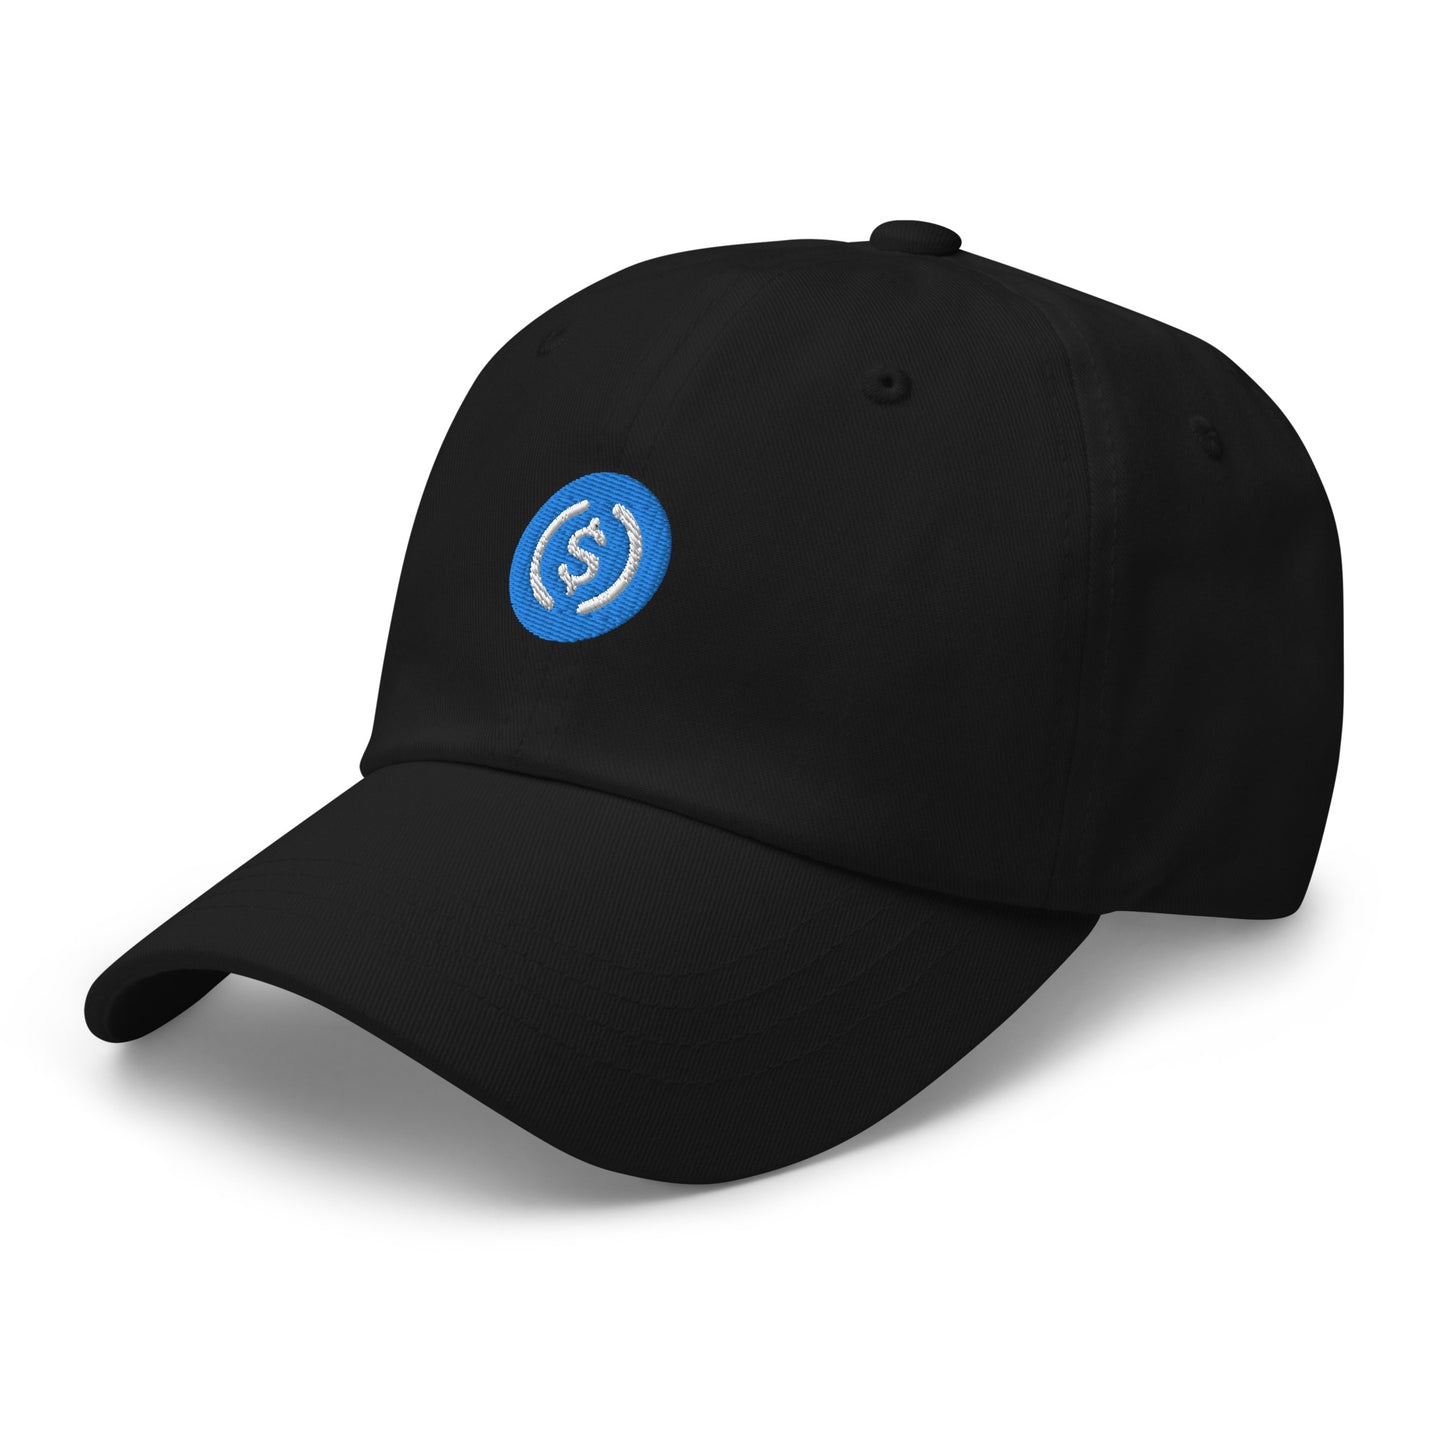 USD Coin (USDC) - Fitted baseball cap